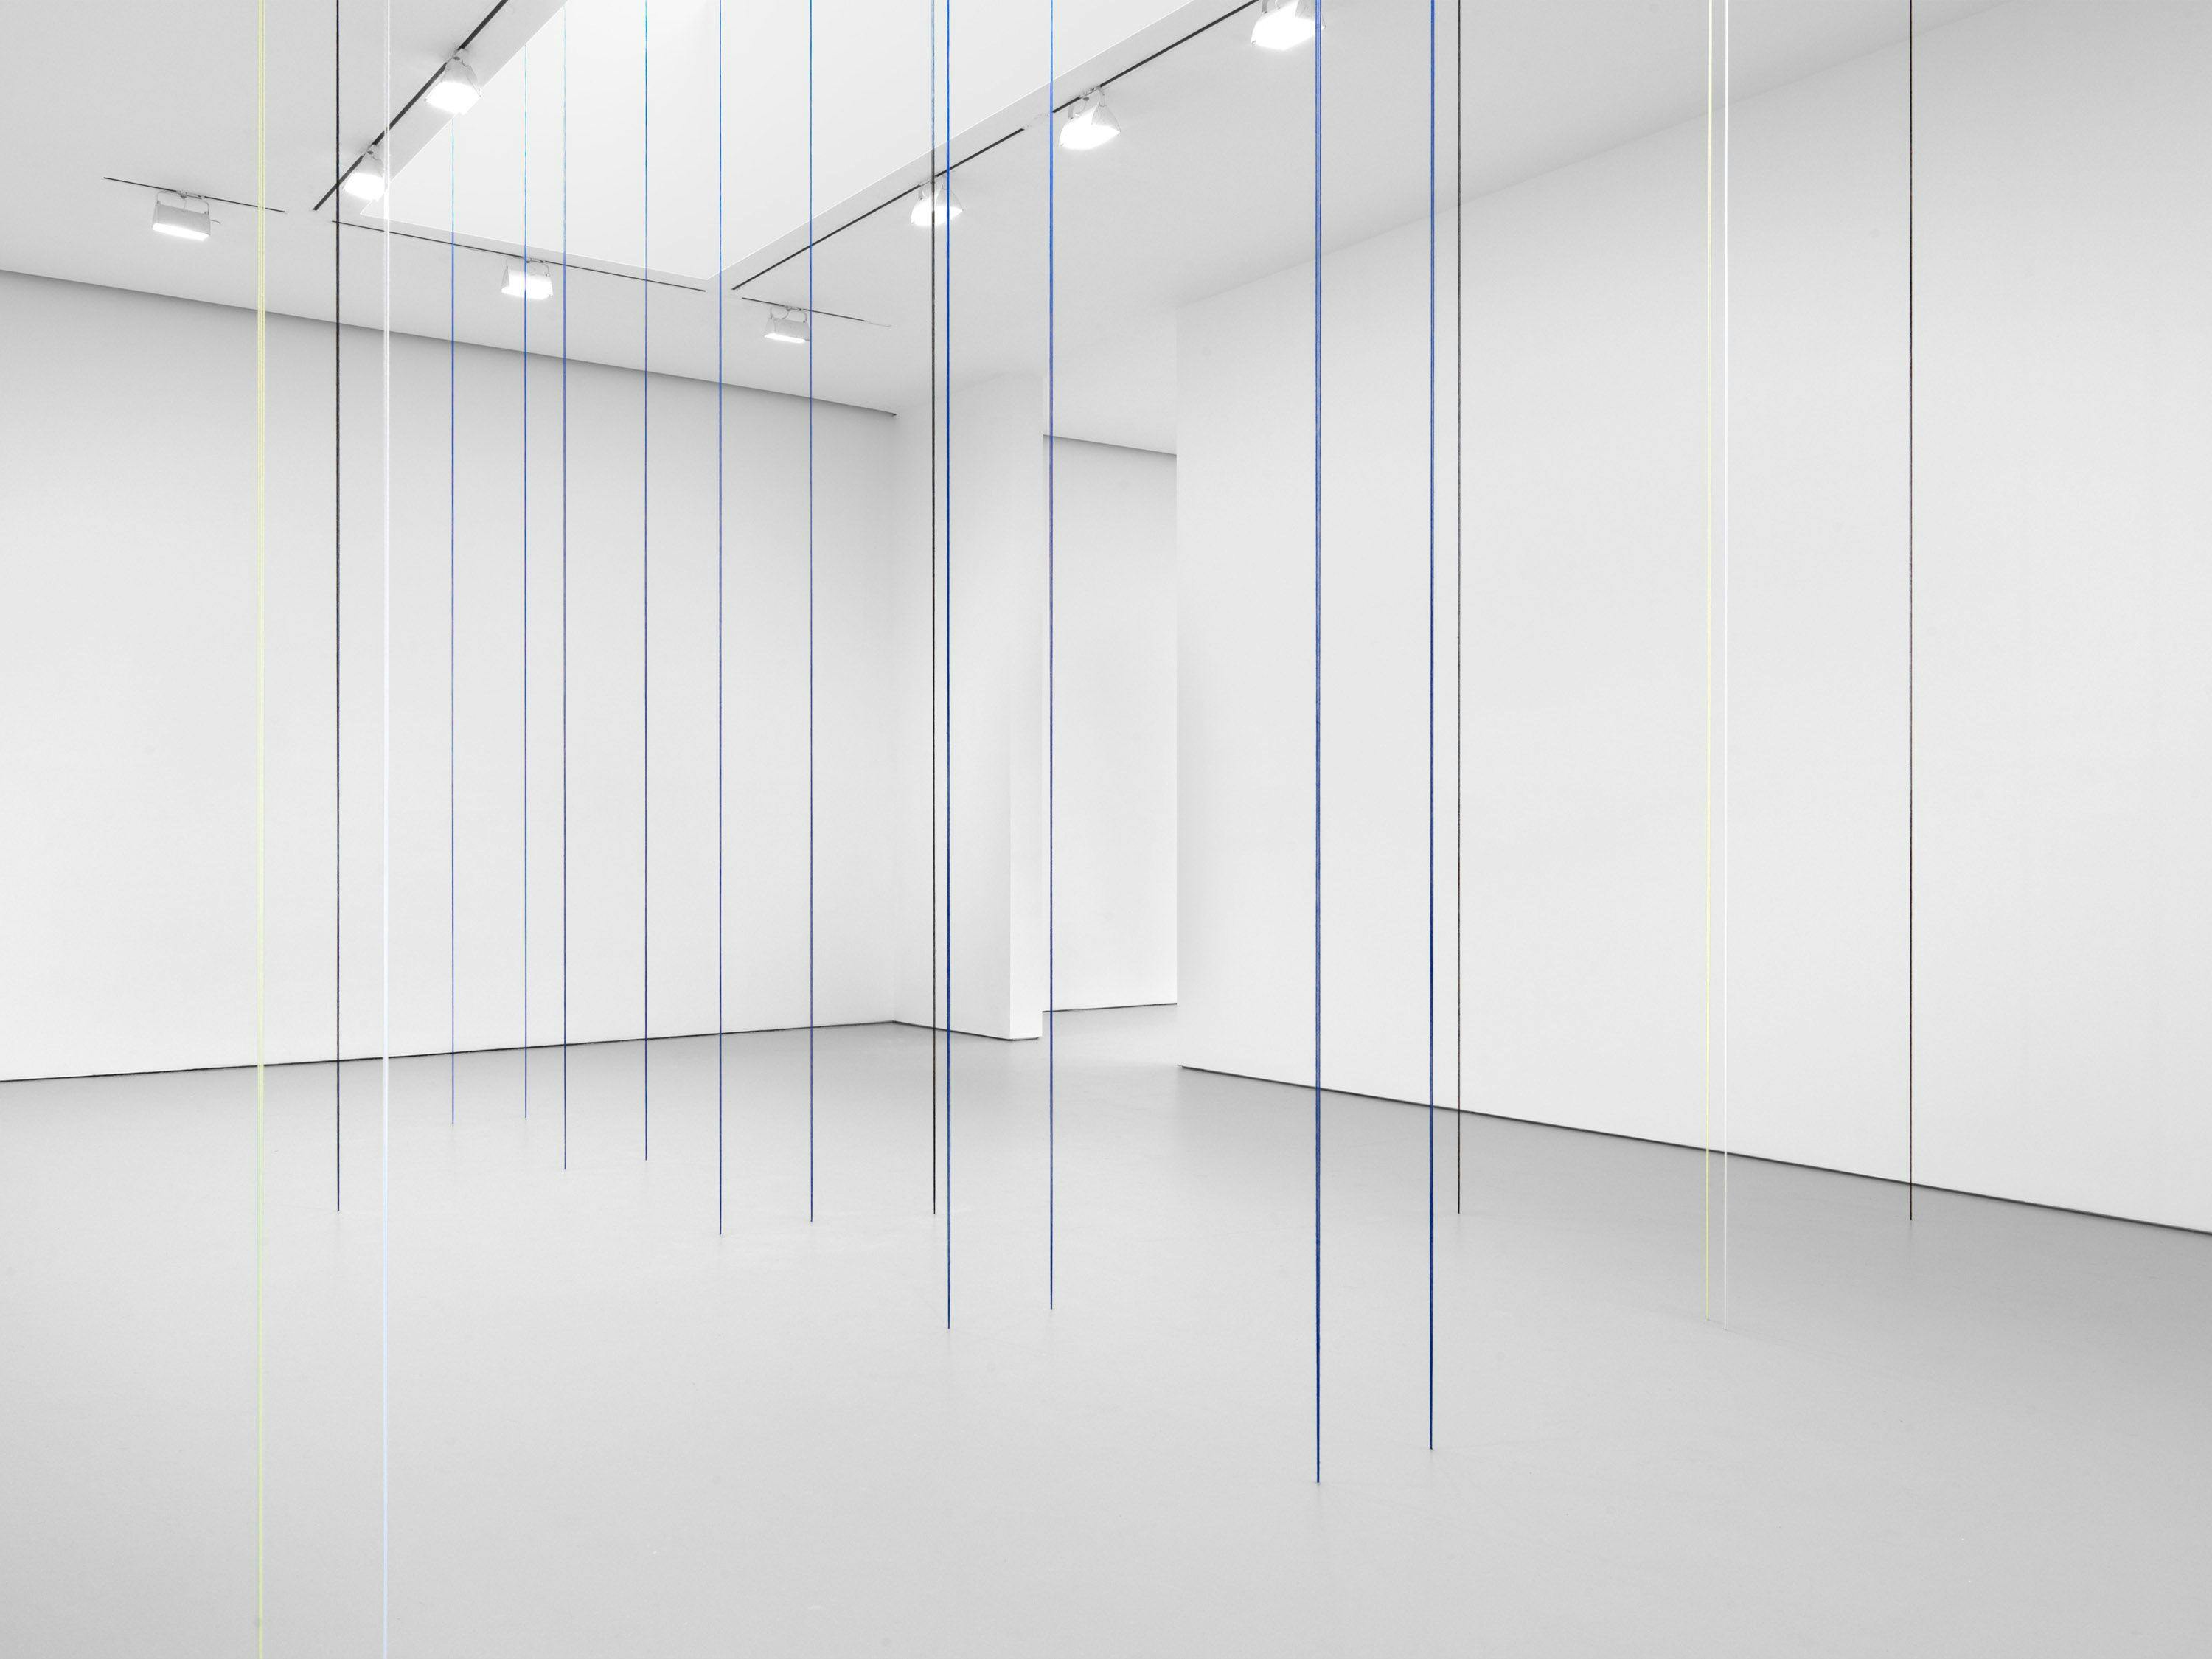 A black, blue, white, and light yellow acrylic yarn artwork by Fred Sandback, titled Untitled (Sculptural Study, Eighteen-part Architectonic Vertical Construction), 1987 and 2018.